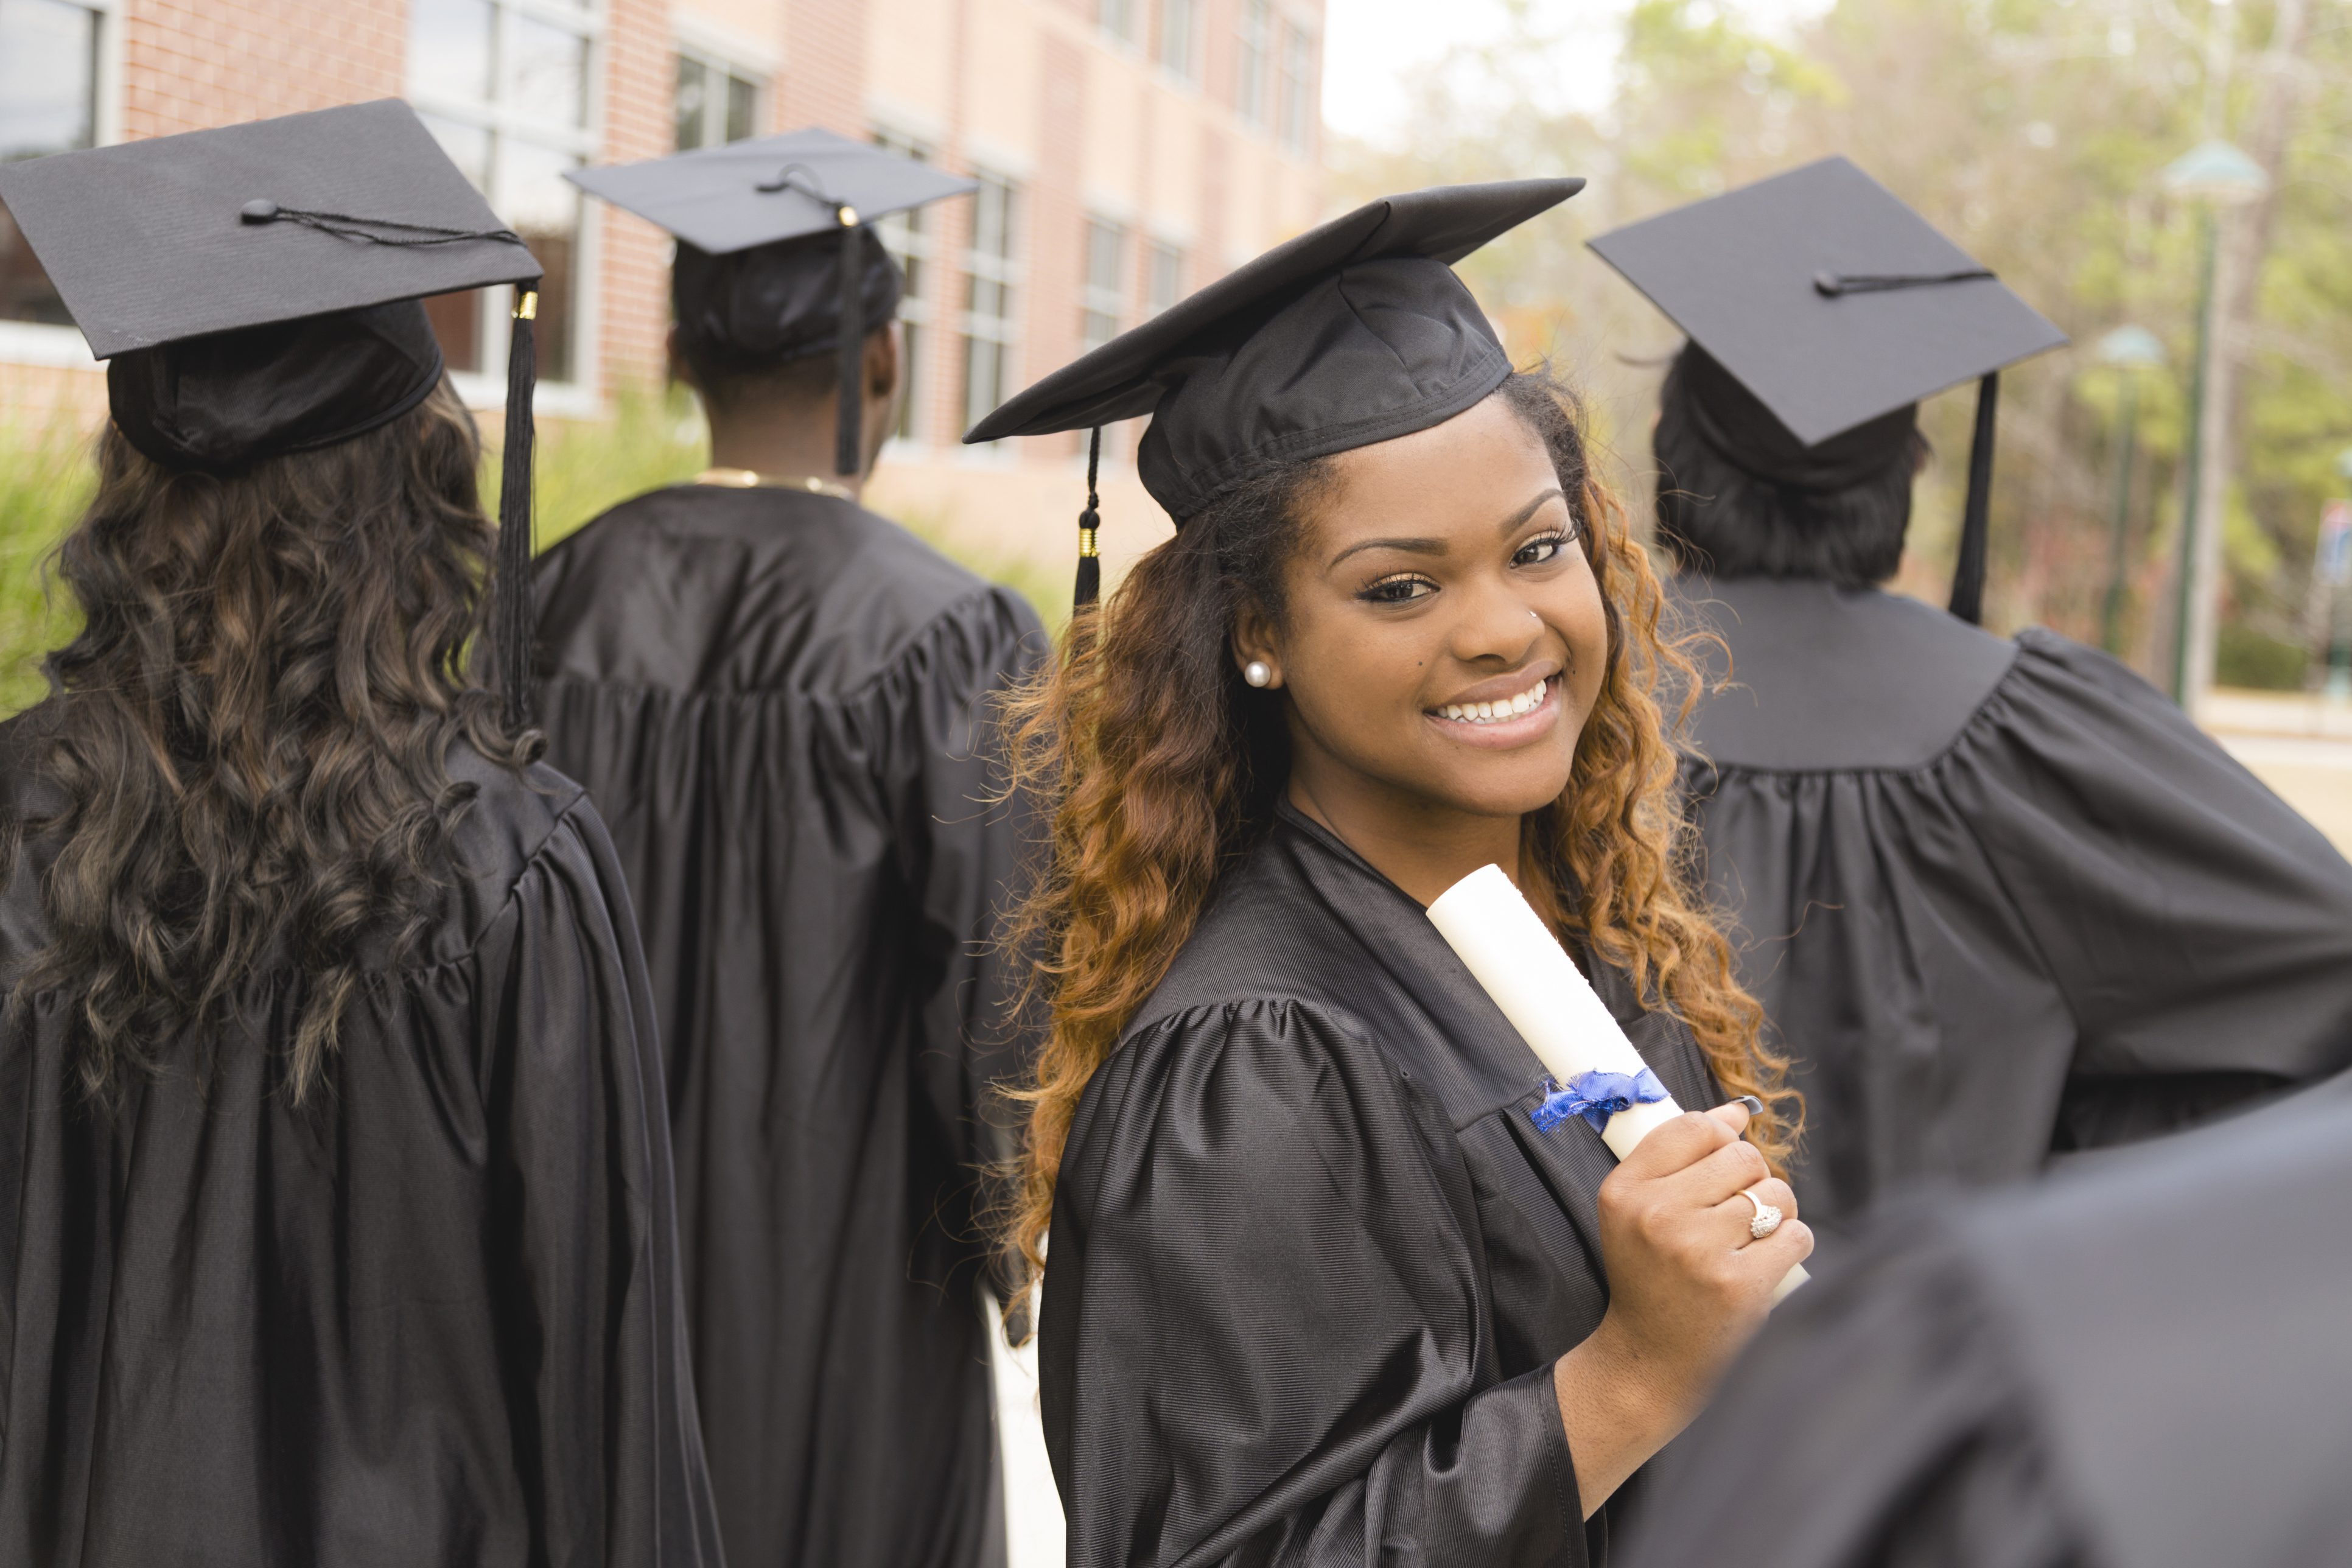 How Much Does Having A College Degree Matter In The Dating World?